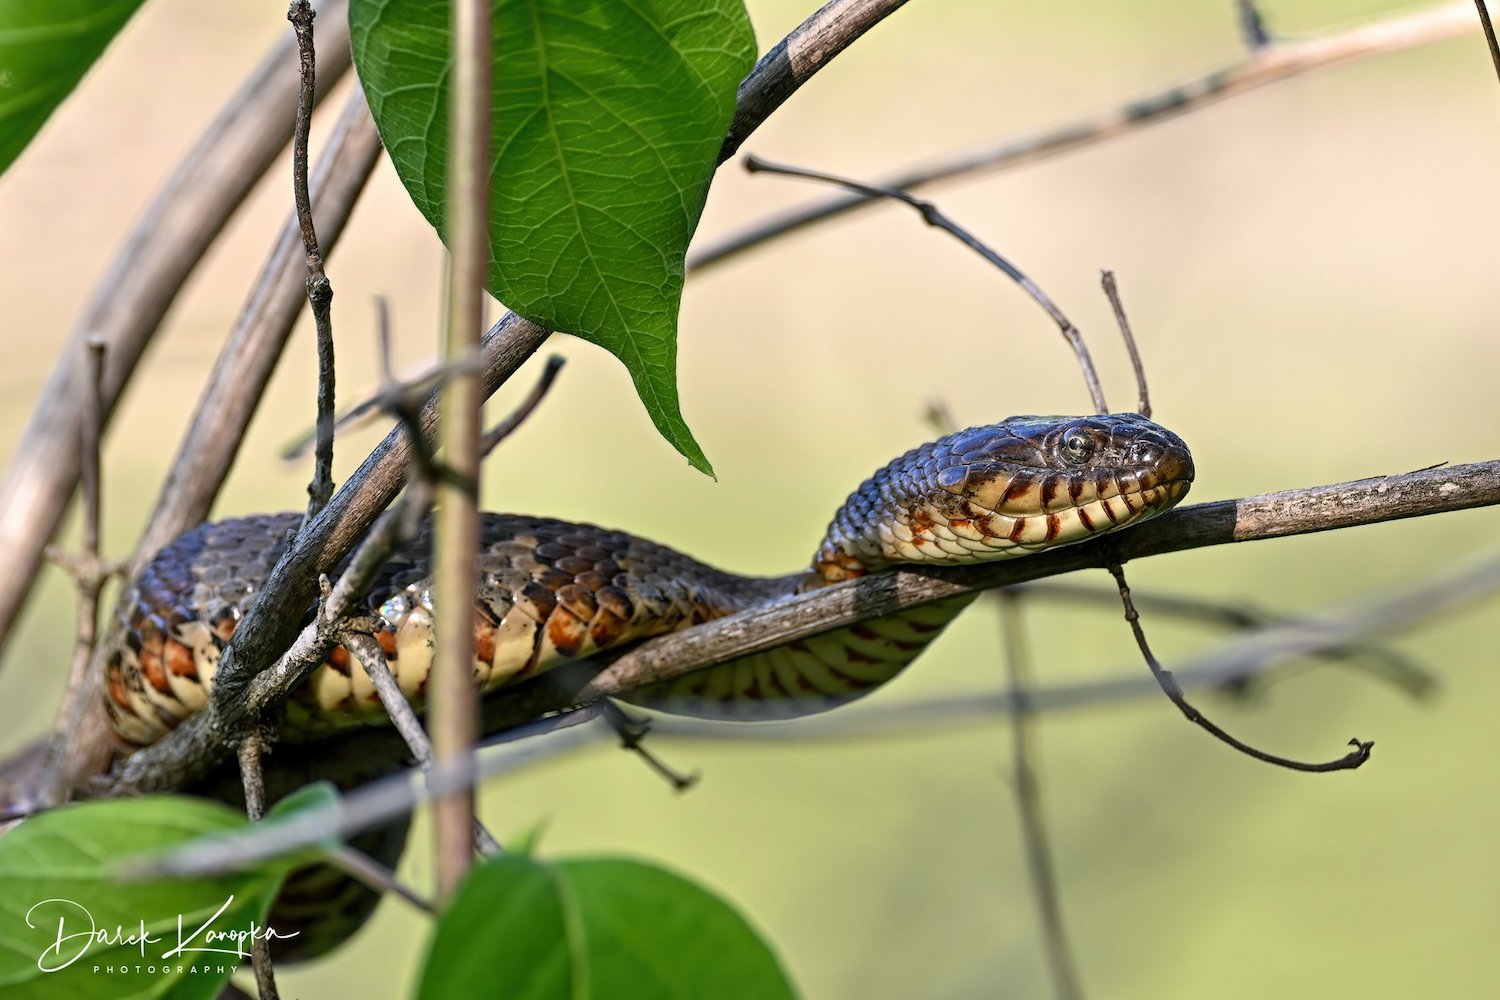 A northern water snake on a tree branch.